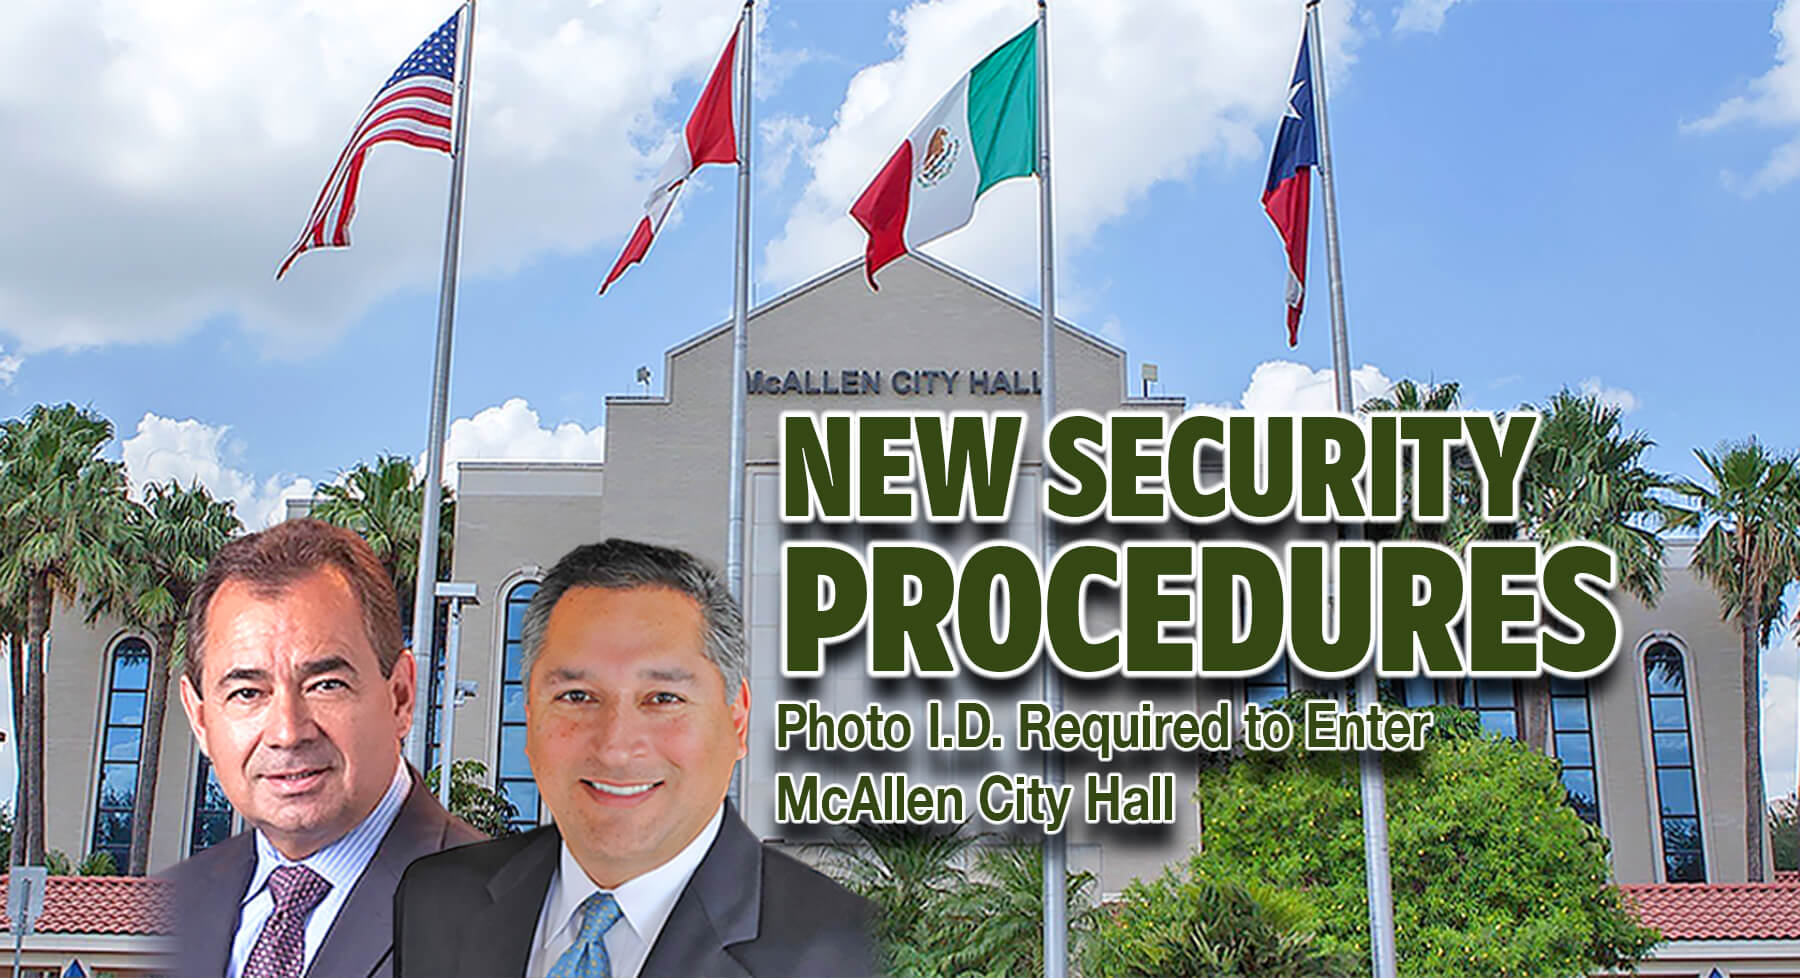 All visitors to McAllen City Hall, including employees at other City of McAllen facilities, residents, visitors, vendors and the media, are required to show photo identification at the front entrance of the building, located at 1300 W. Houston Ave., will wear a visitor badge and will only be allowed to enter designated department. Image for illustration purposes